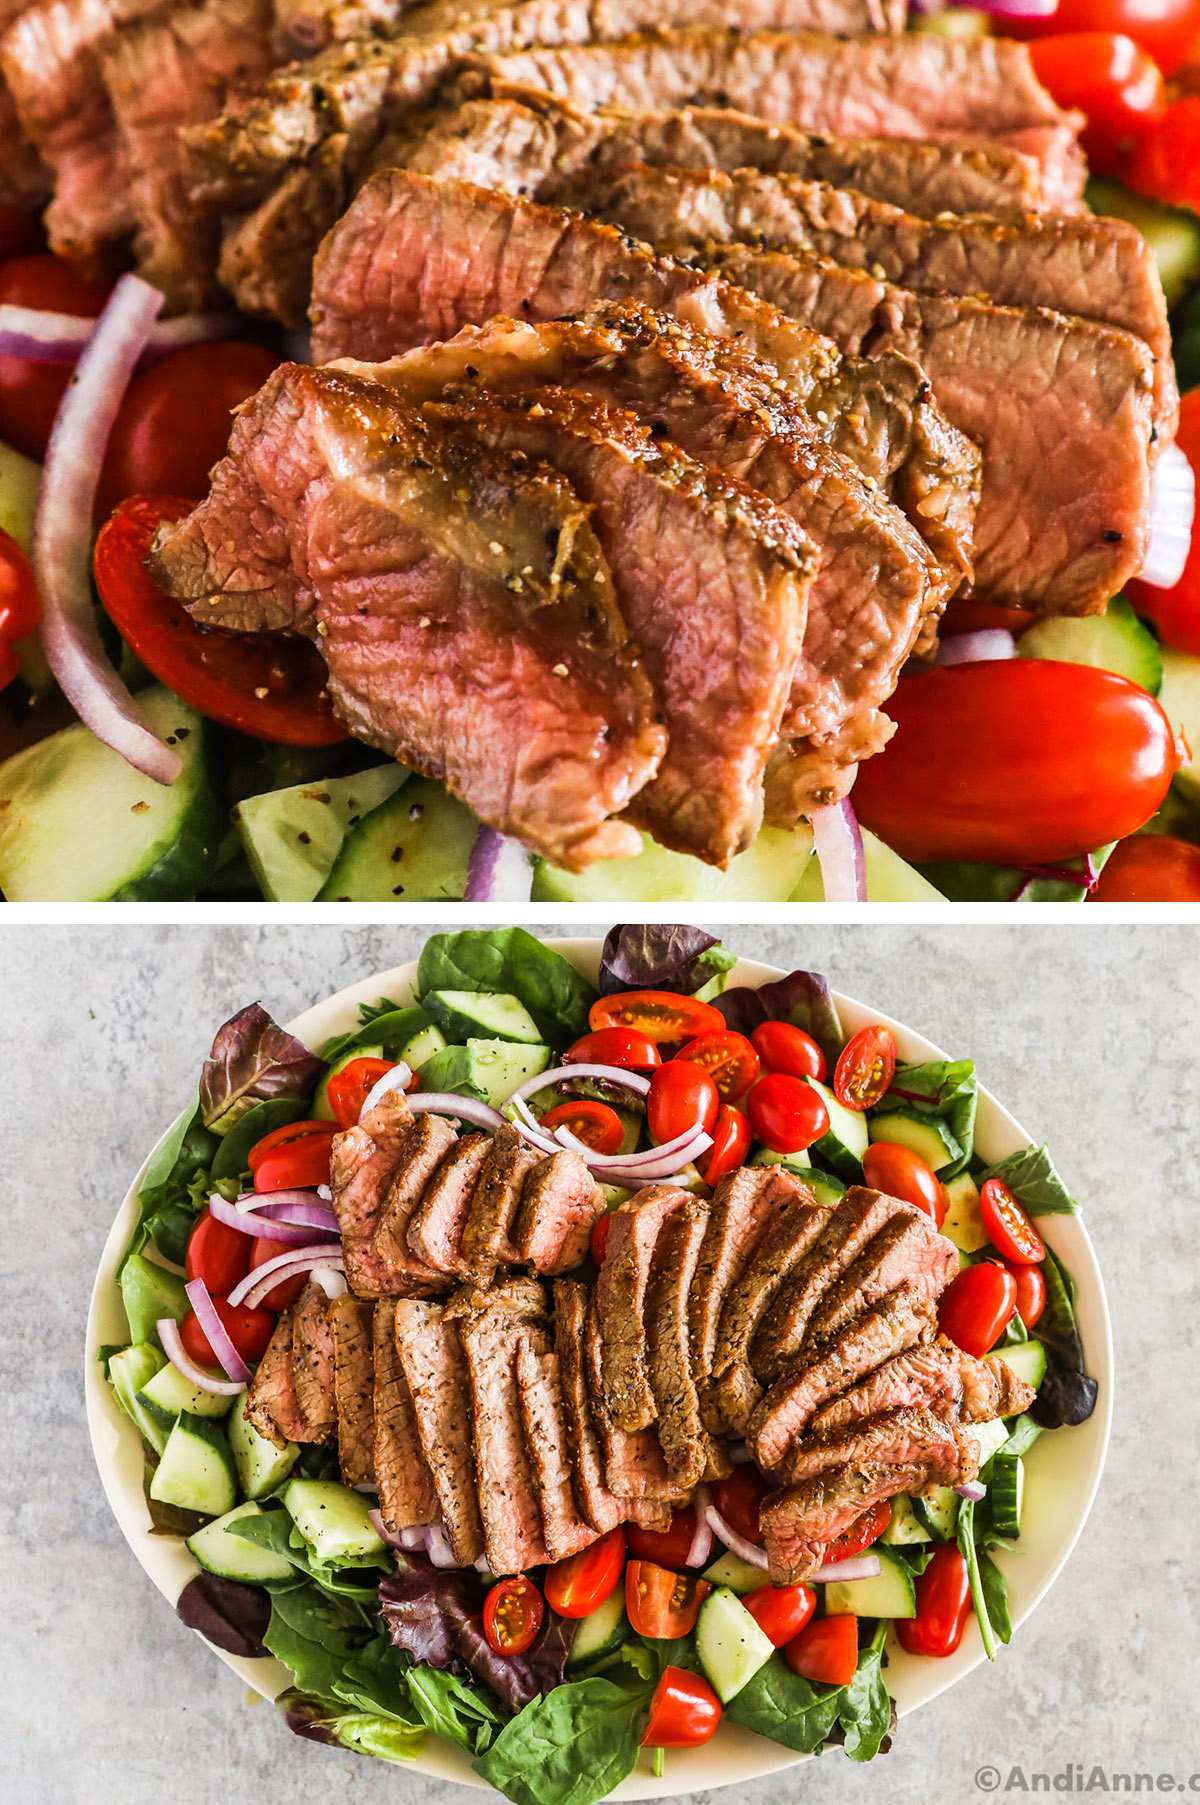 Close up of slices of steak, and a plate of steak salad.